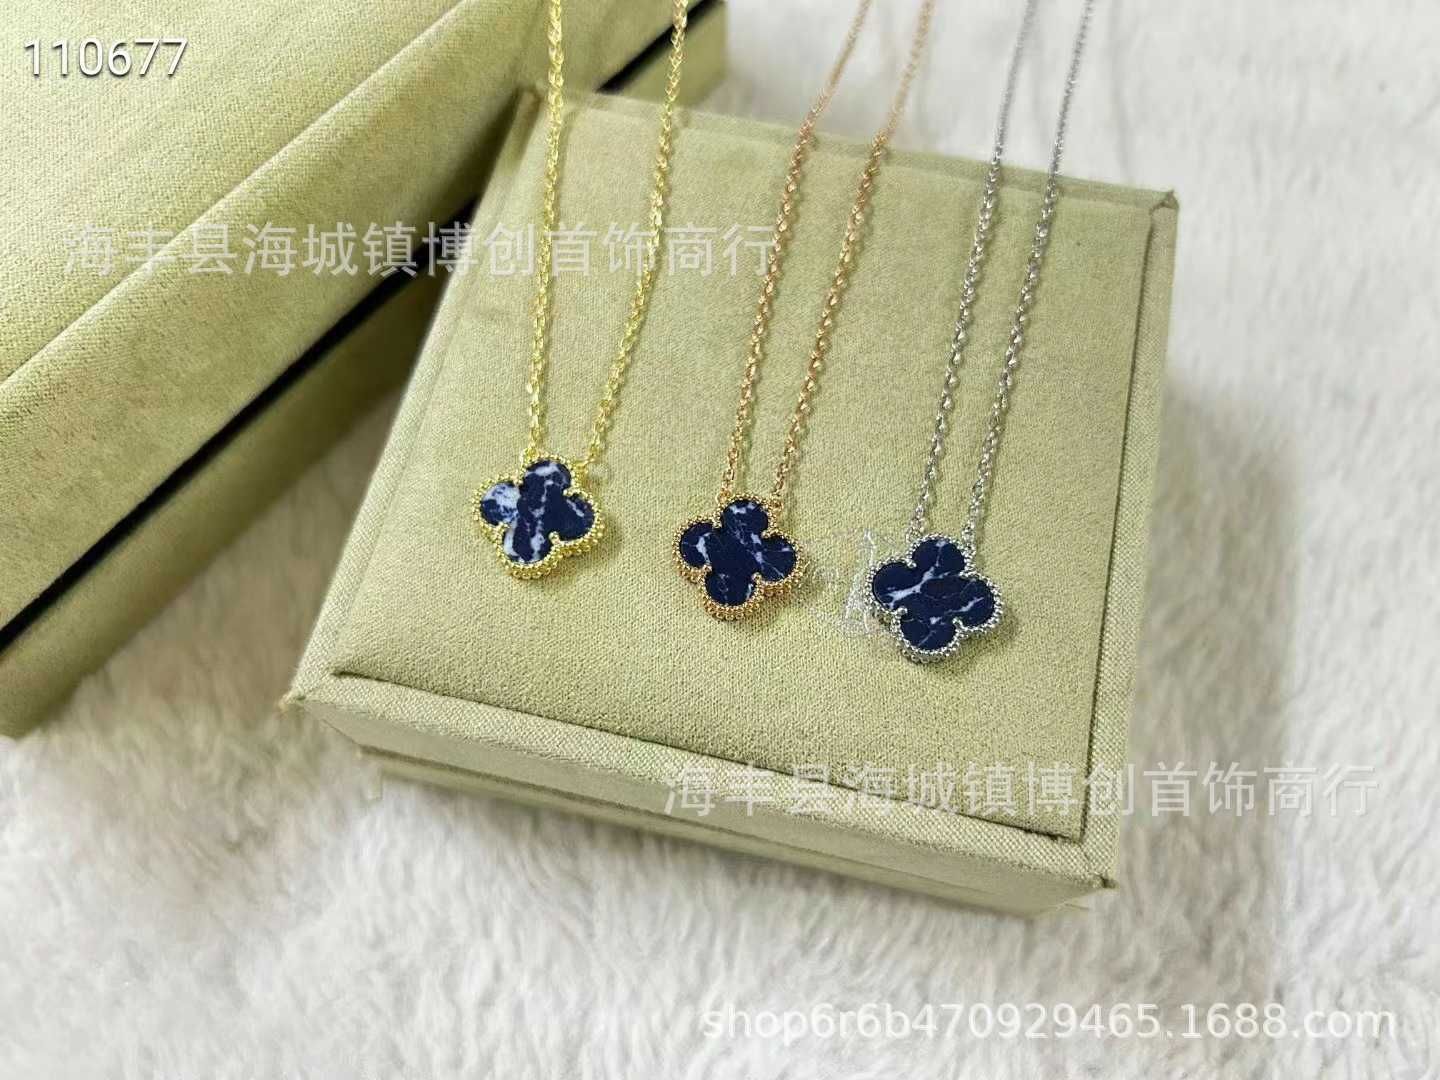 New Necklace Peter Stone Blue Rose Gol